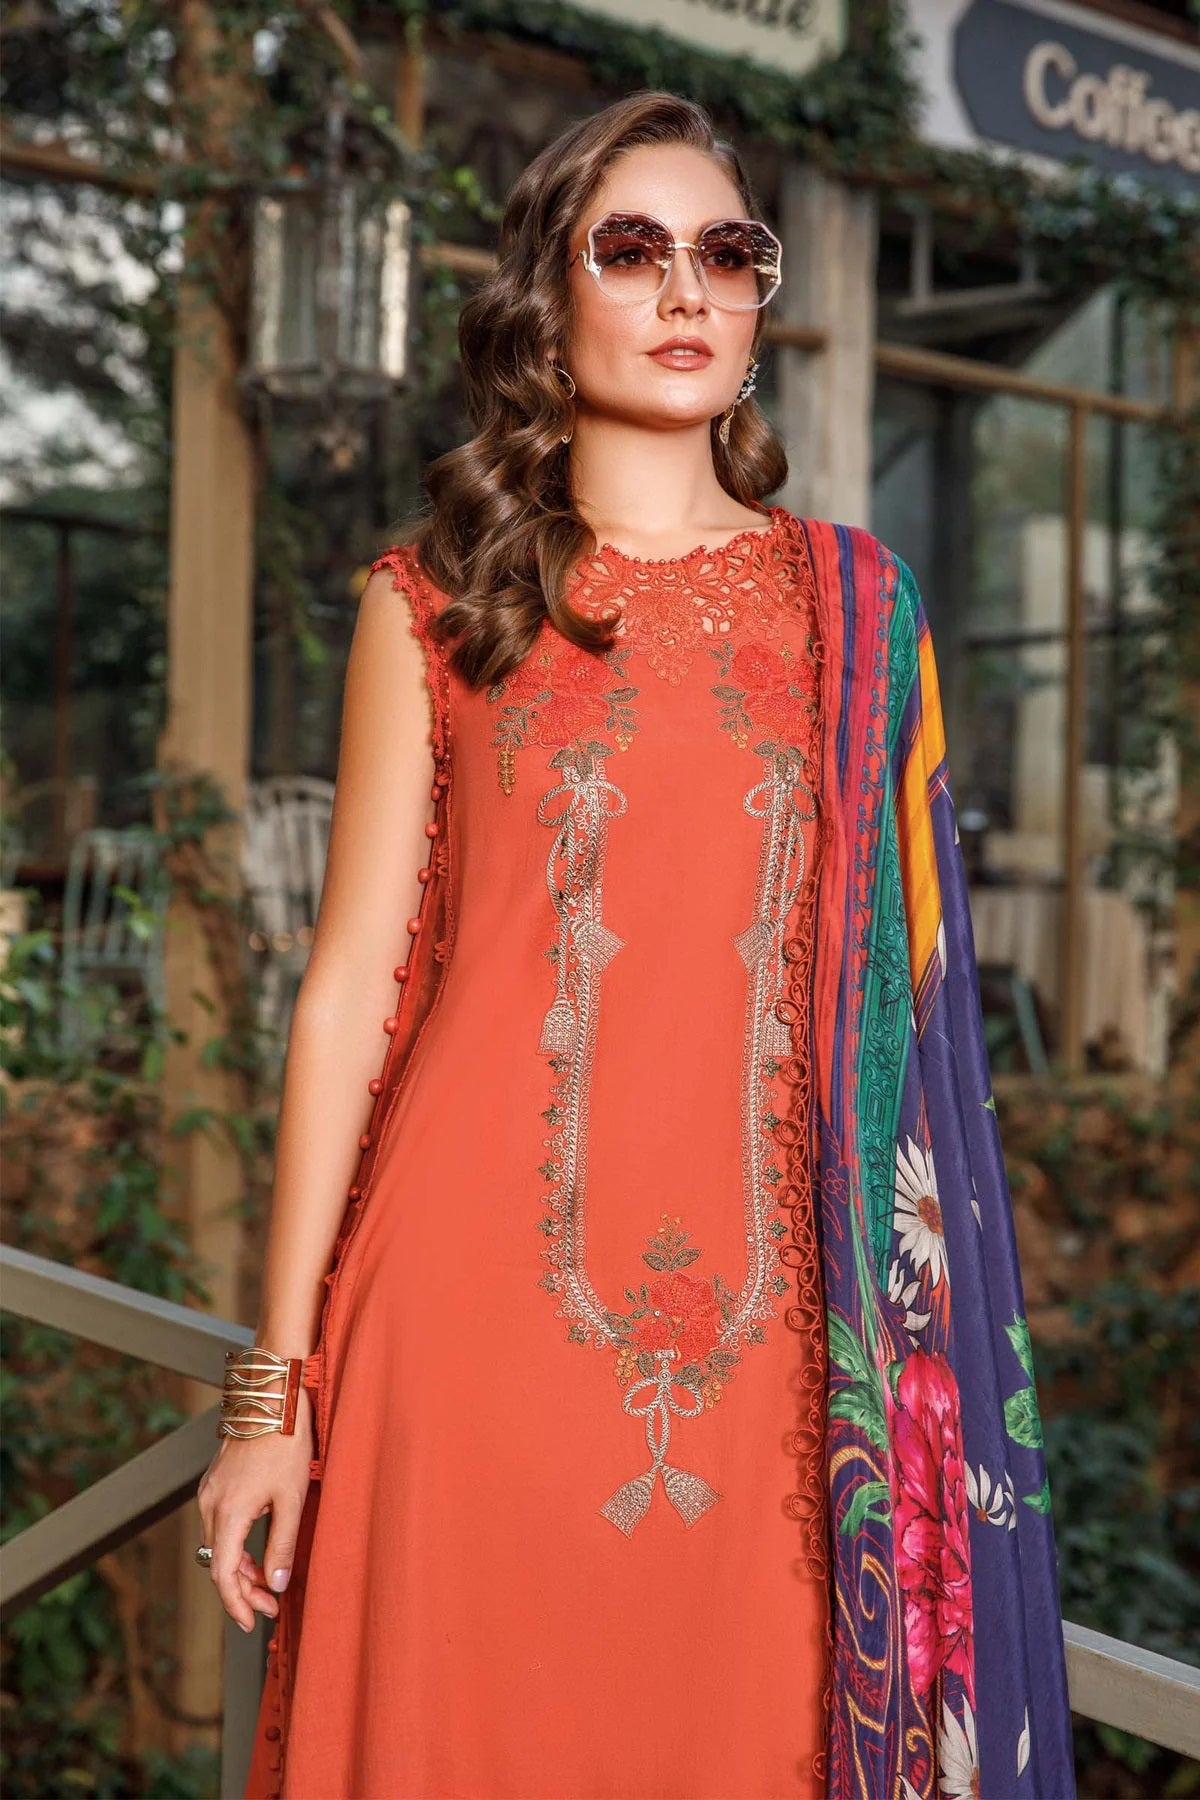 M.Prints By Maria B Embroidered Lawn Suits Unstitched 3 Piece MPT-1707-B